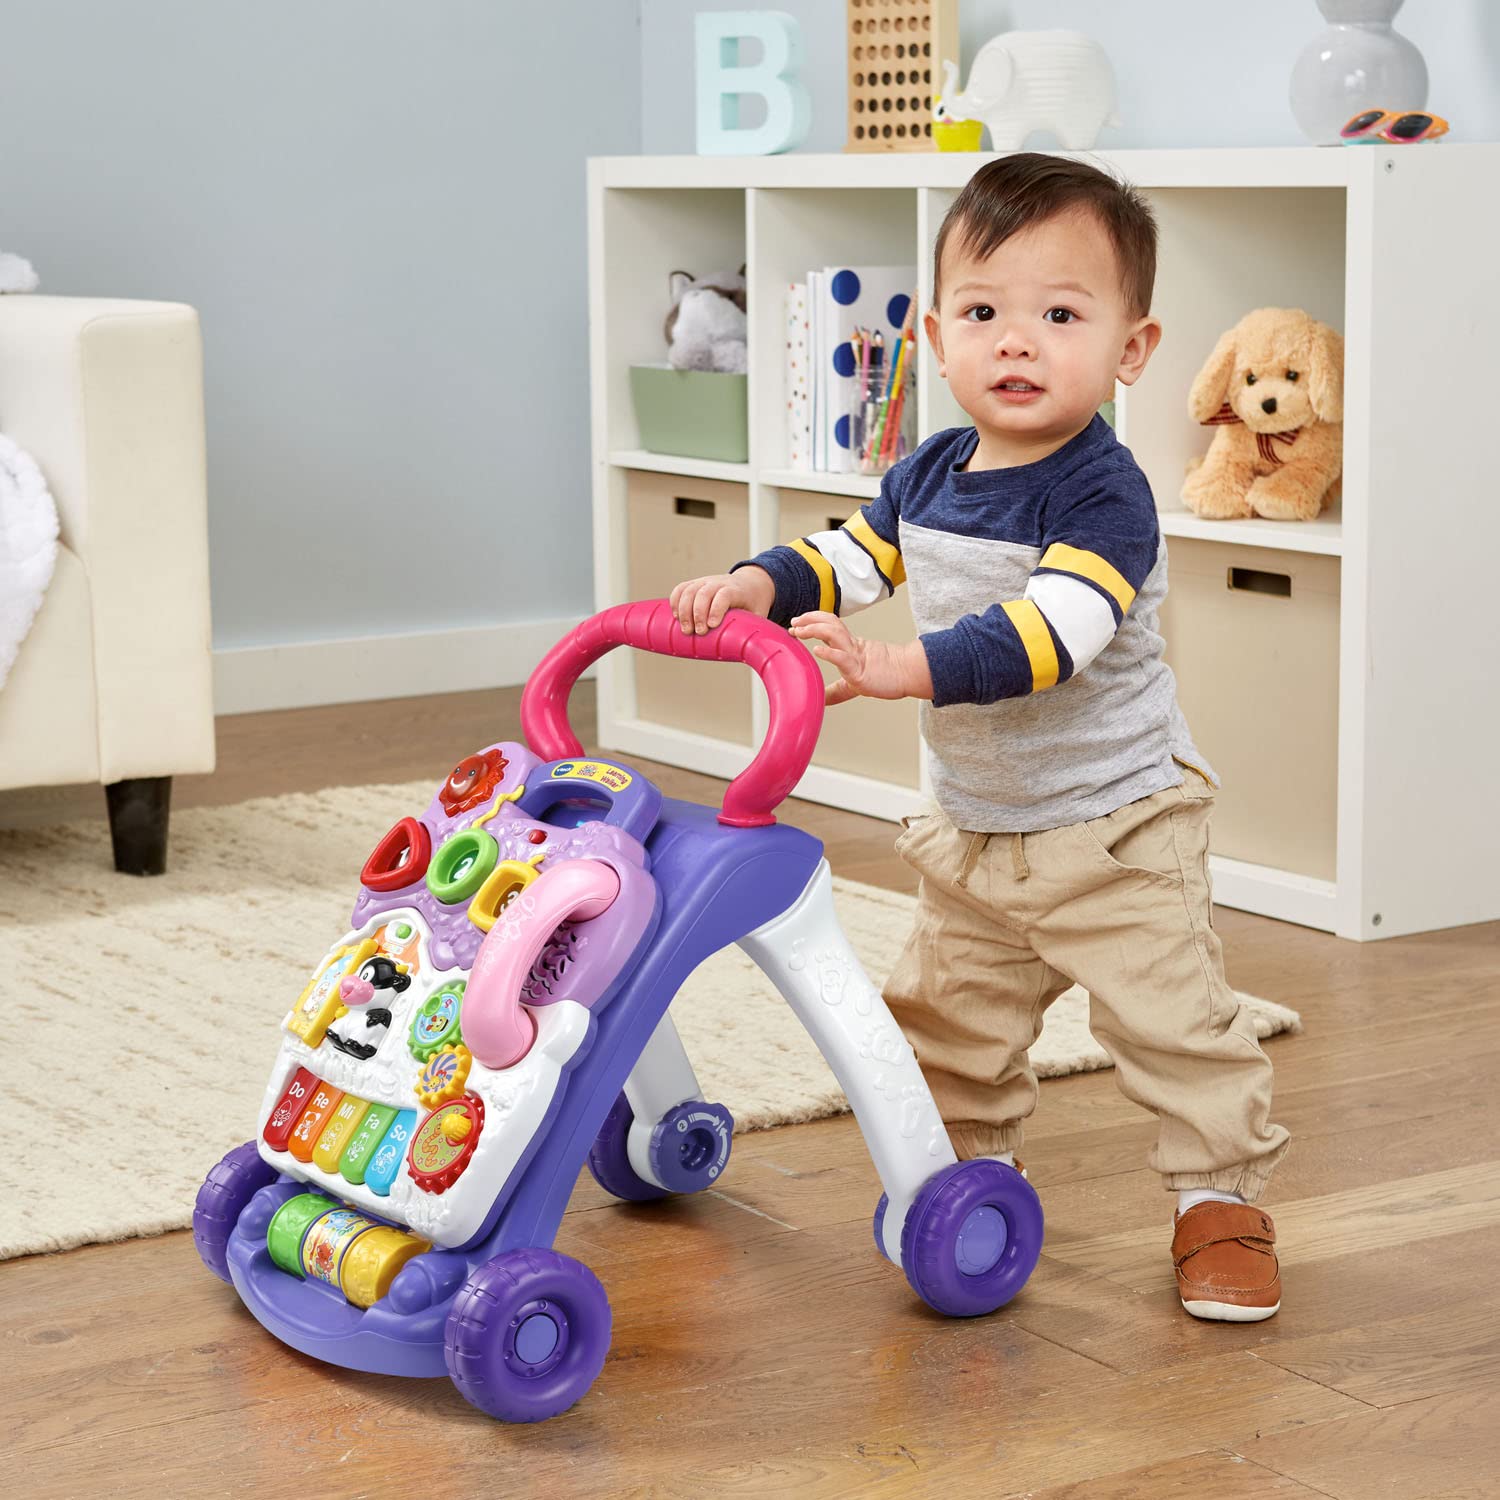 VTech Sit-to-Stand Learning Walker (Frustration Free Packaging), Lavender (Amazon Exclusive)